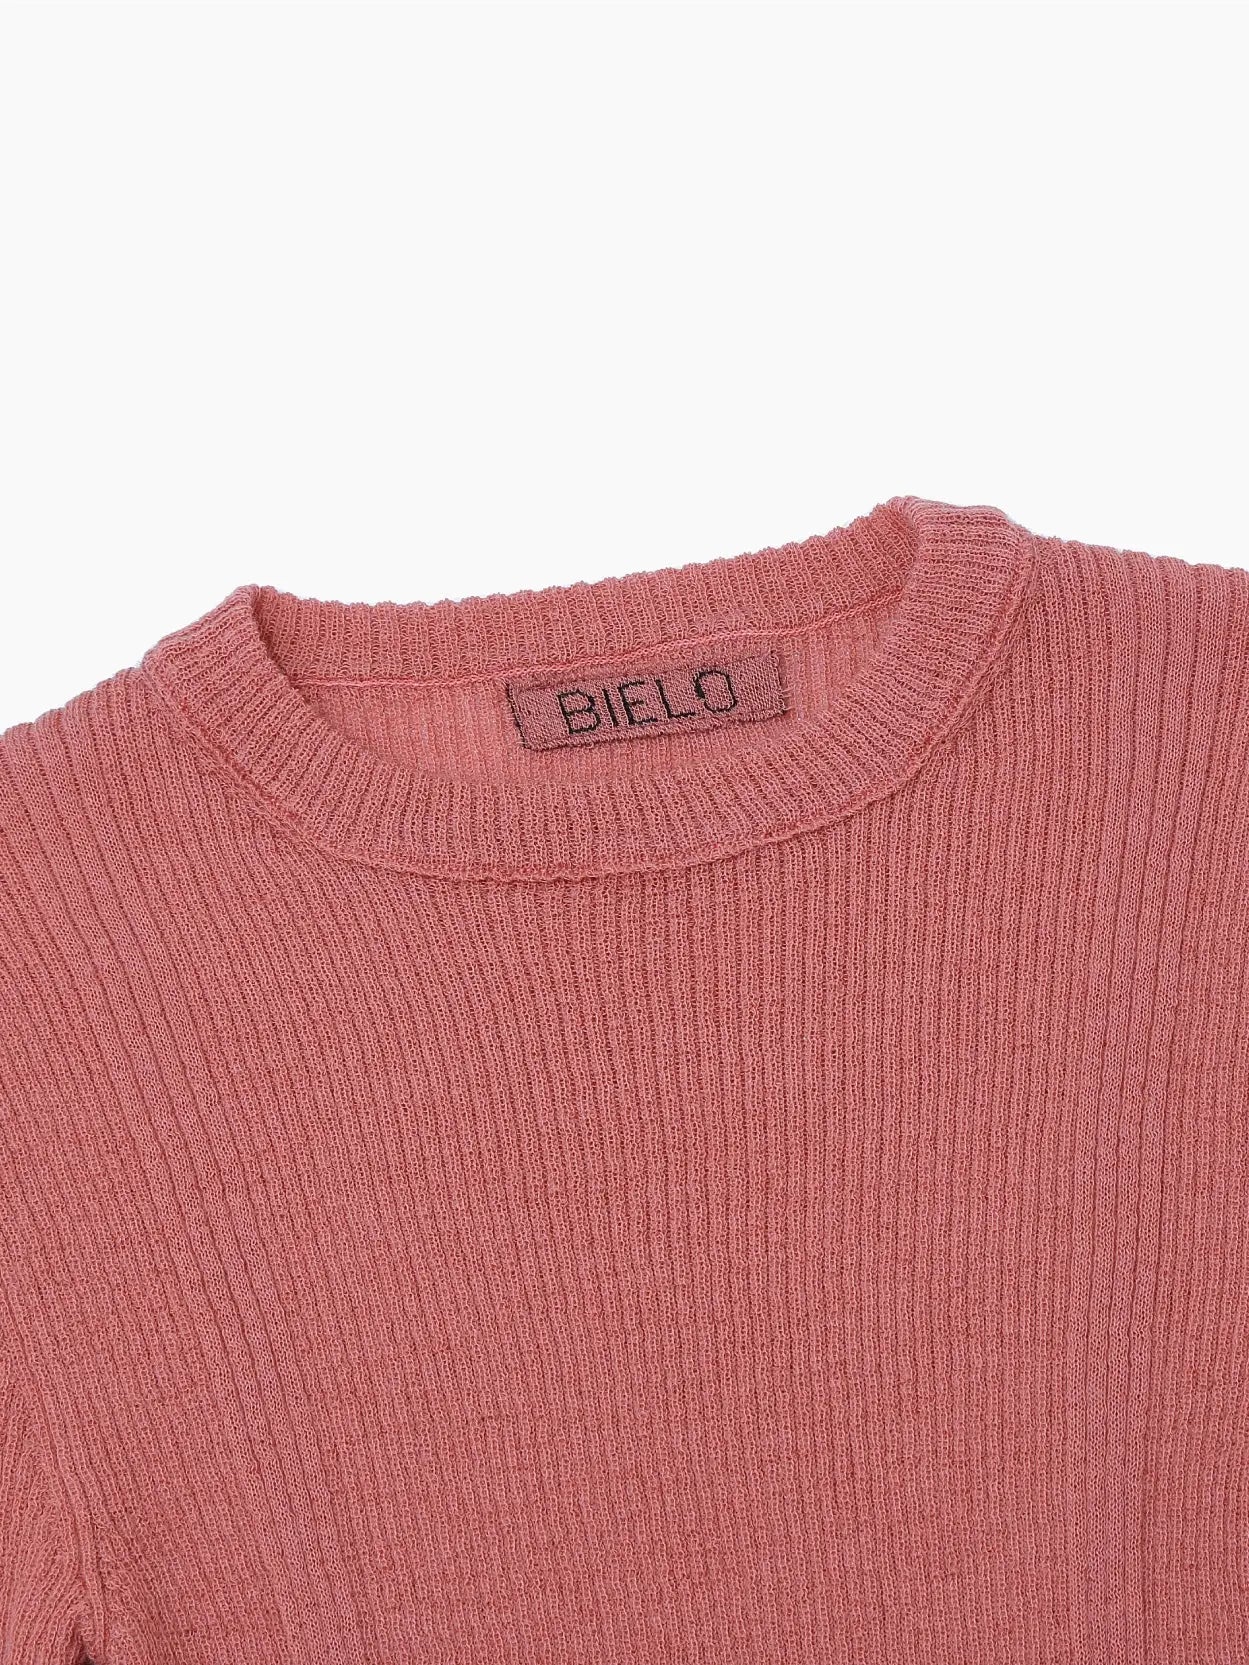 A ribbed, long-sleeve sweater in a dusty rose color is displayed against a white background. The fitted style features vertical ribbing patterns for texture and a round neckline. A small fabric tag is visible on the inside back of the neckline, available exclusively at Bassalstore in Barcelona. Product: Masla Long Sleeve Coral by Bielo.